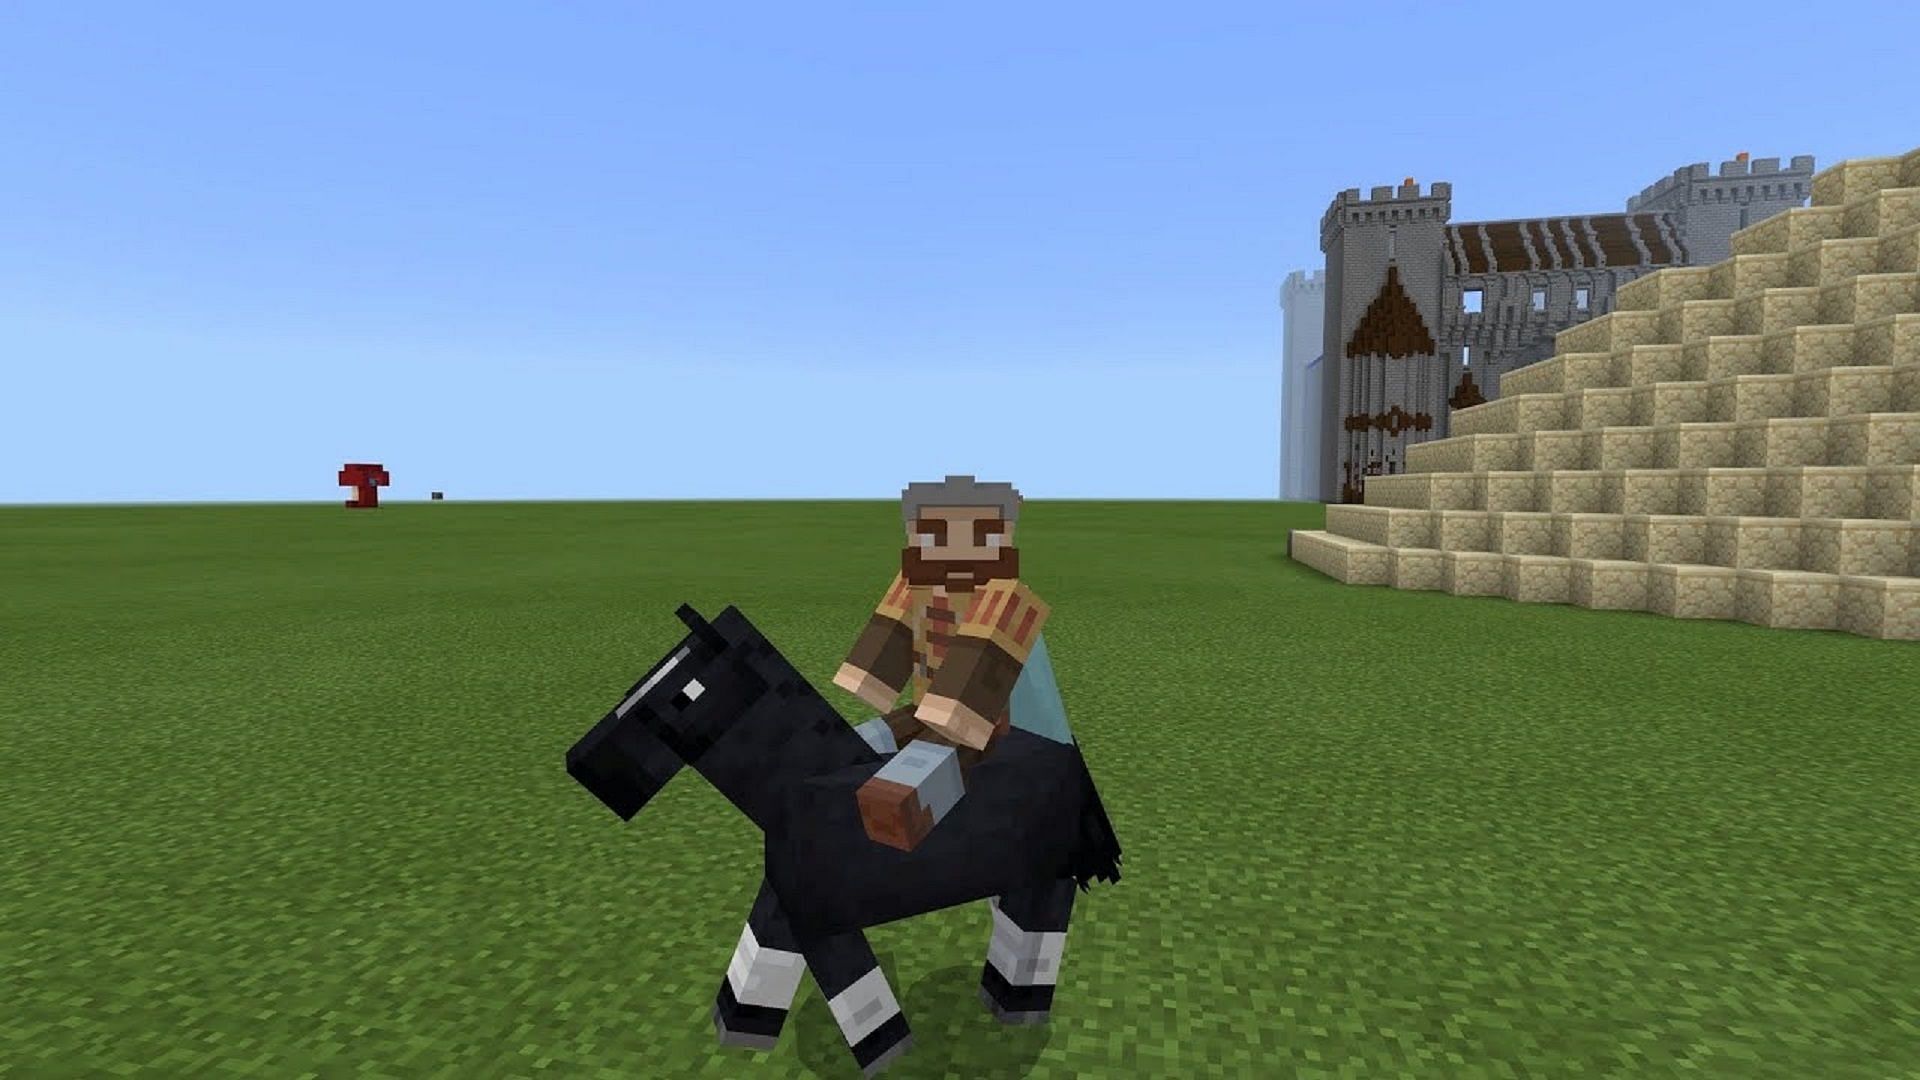 The new /ride command in Minecraft has some interesting applications (Image via Dr Anchored/YouTube)